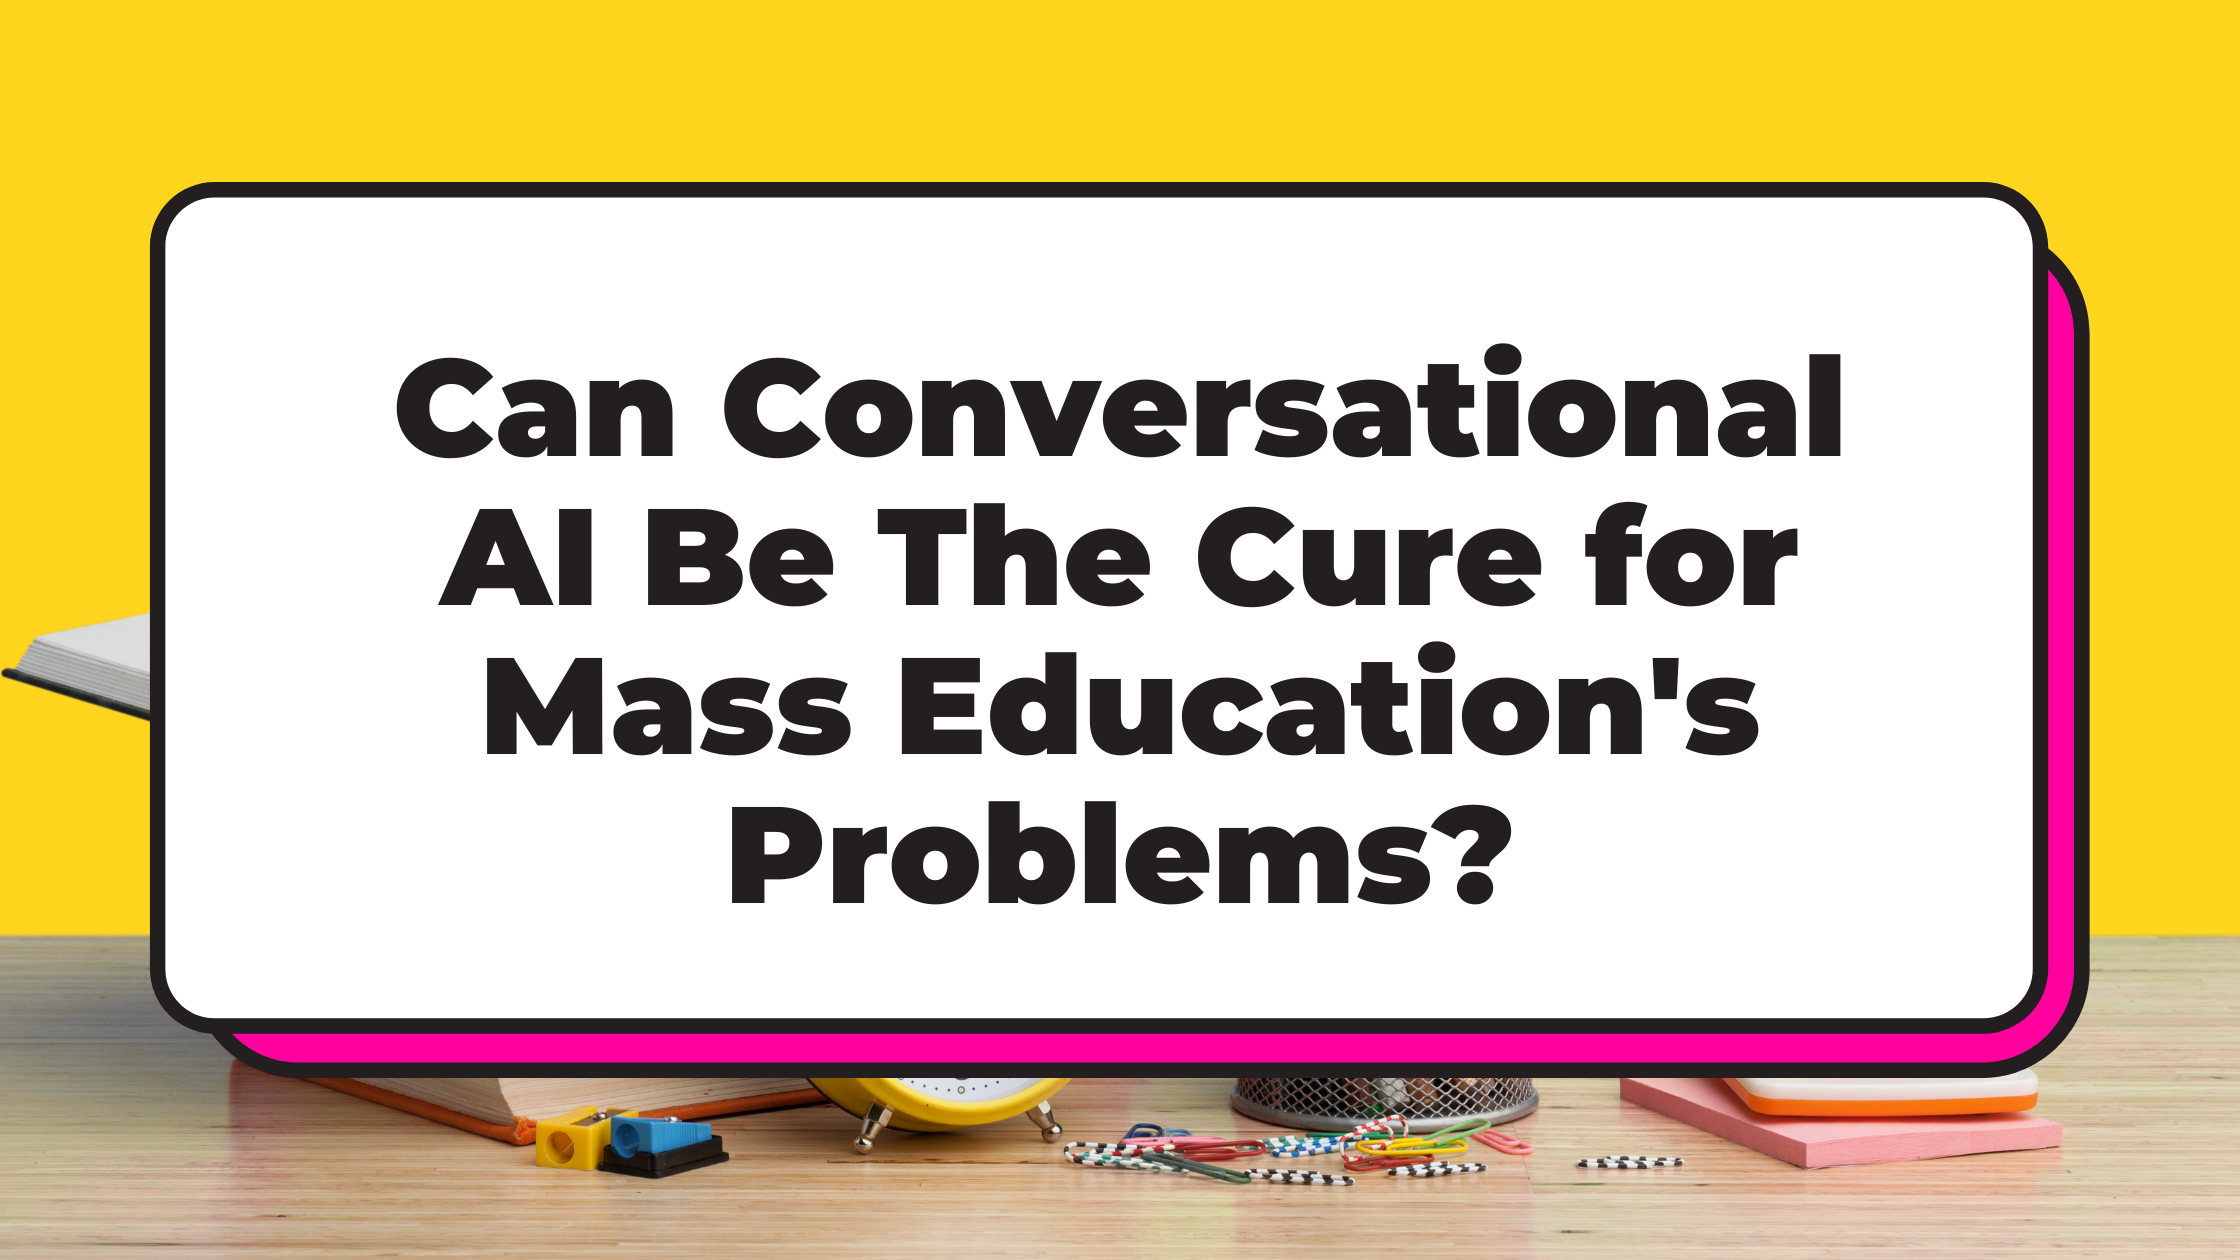 can-conversational-ai-be-the-cure-for-mass-education-problems